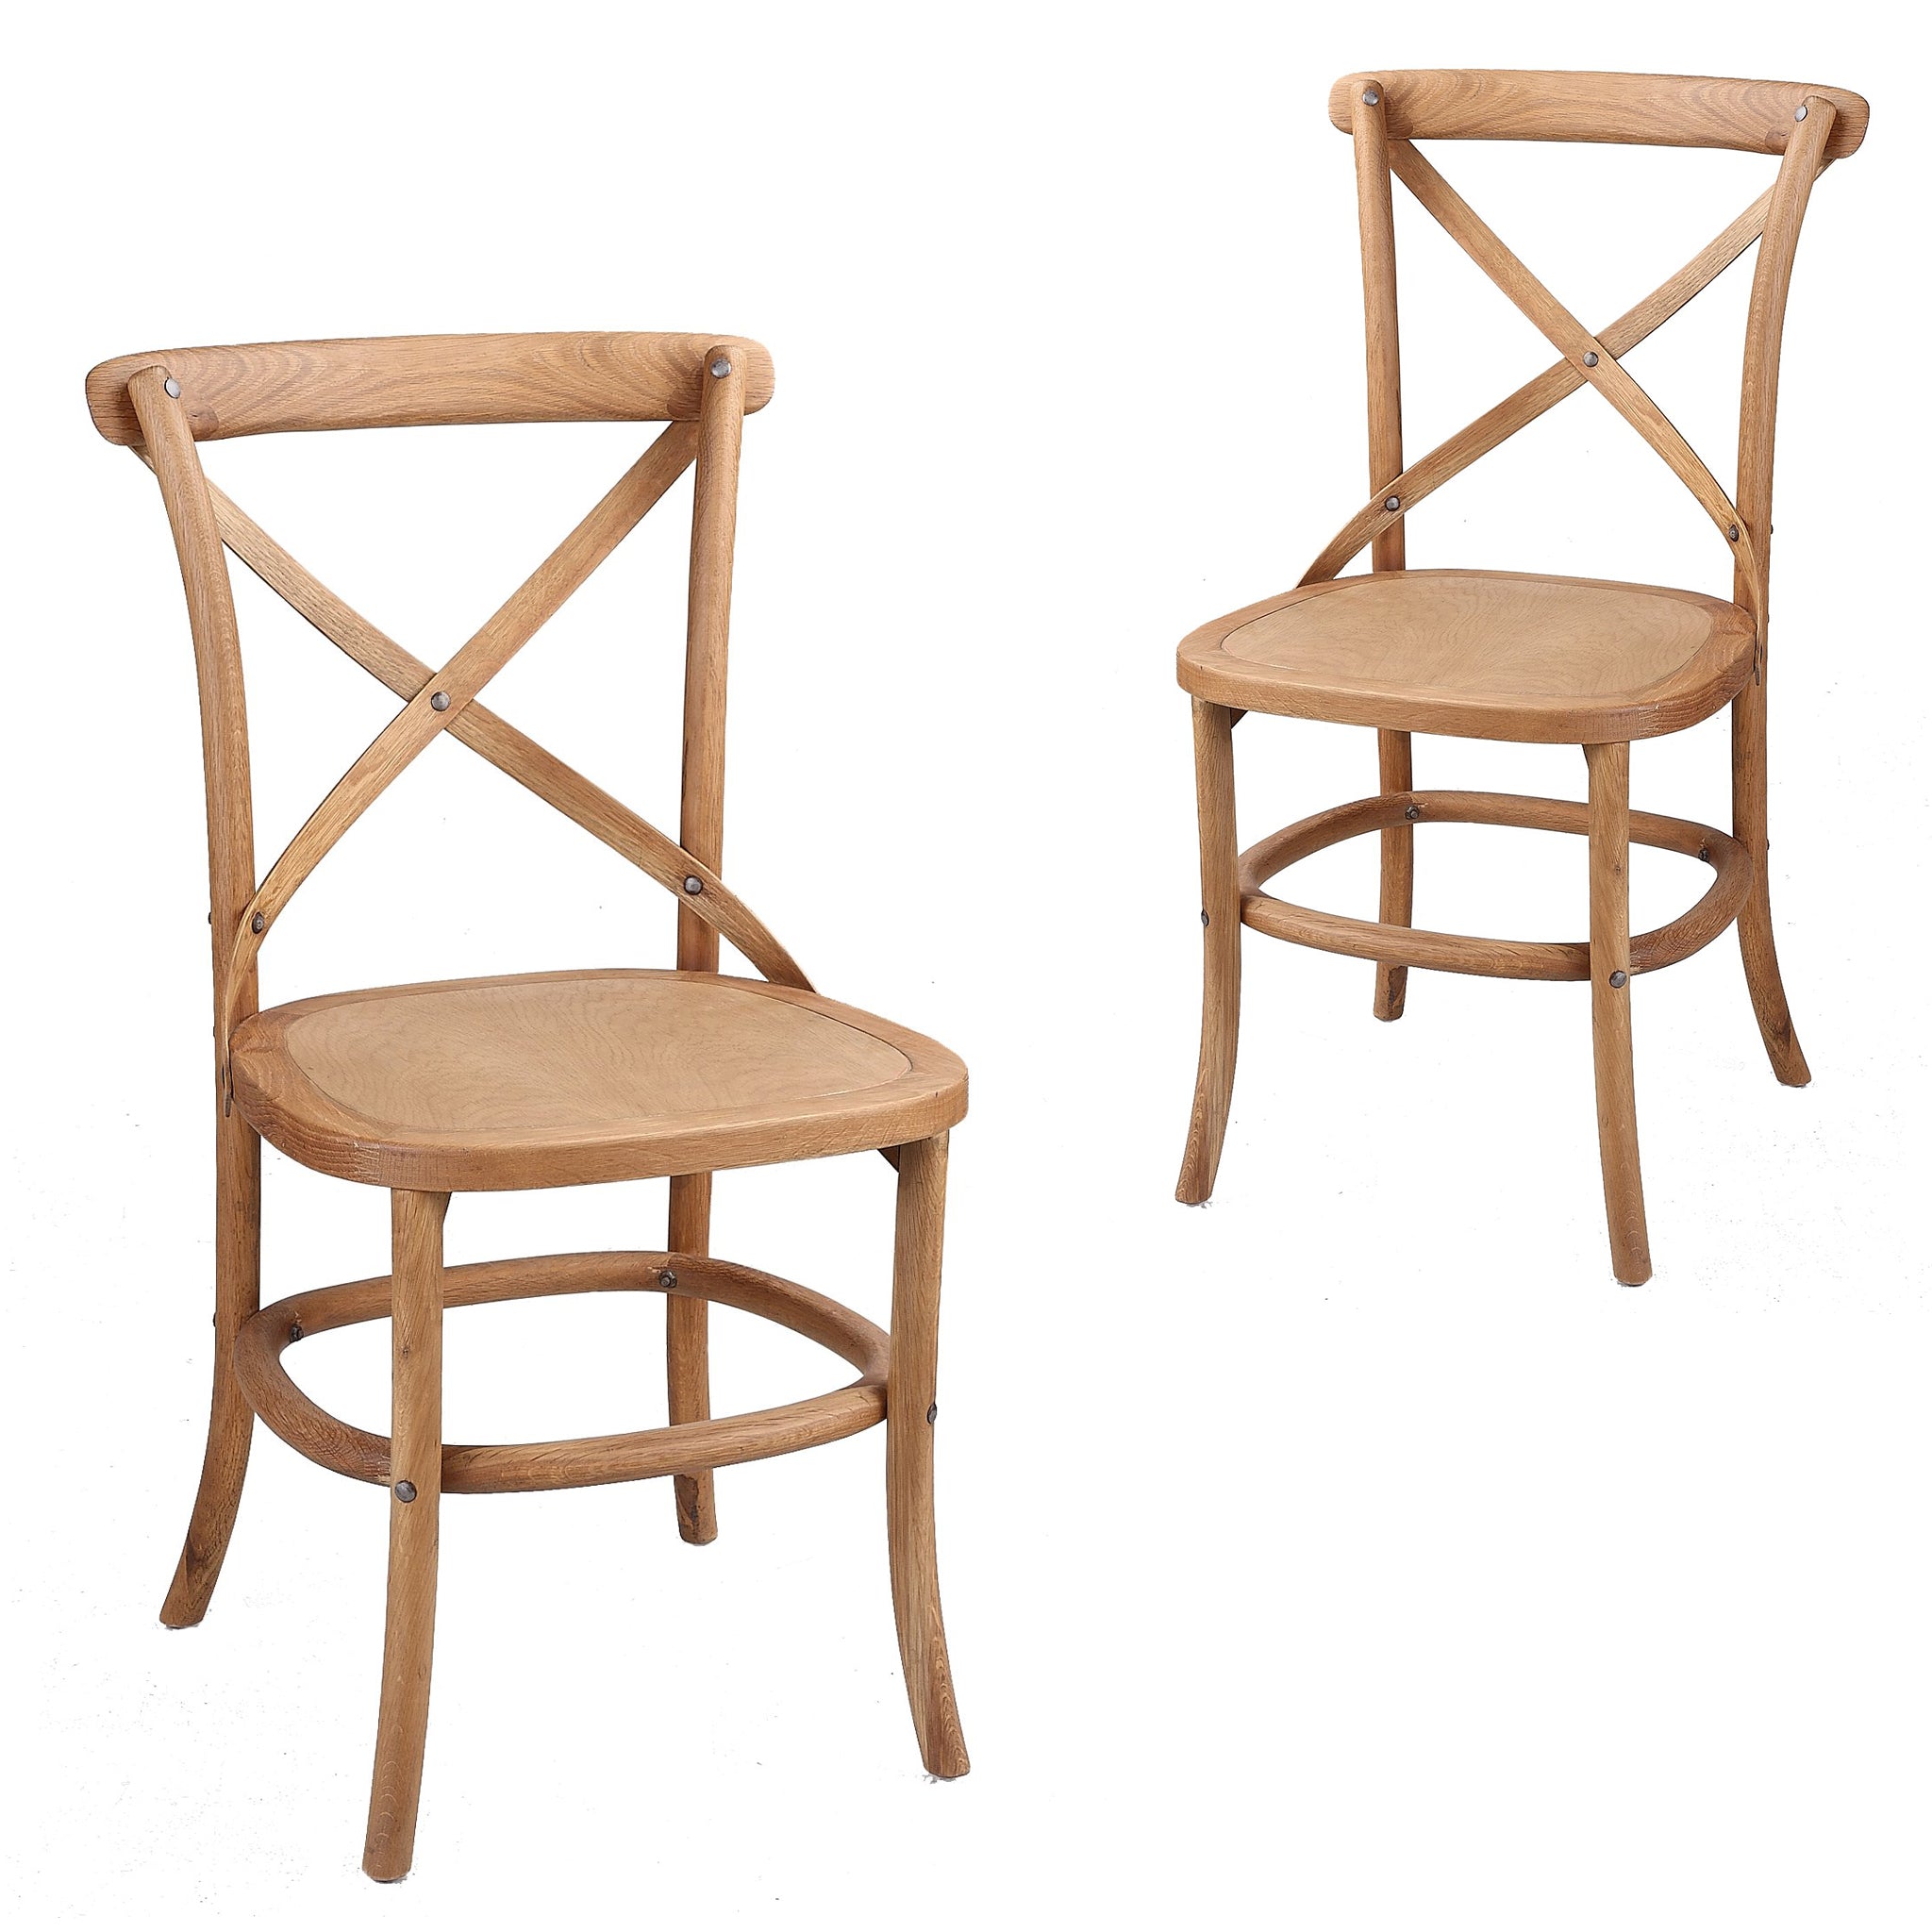 Set of 2 Mesa Wooden Dining Chair - Natural - Dining Chairs